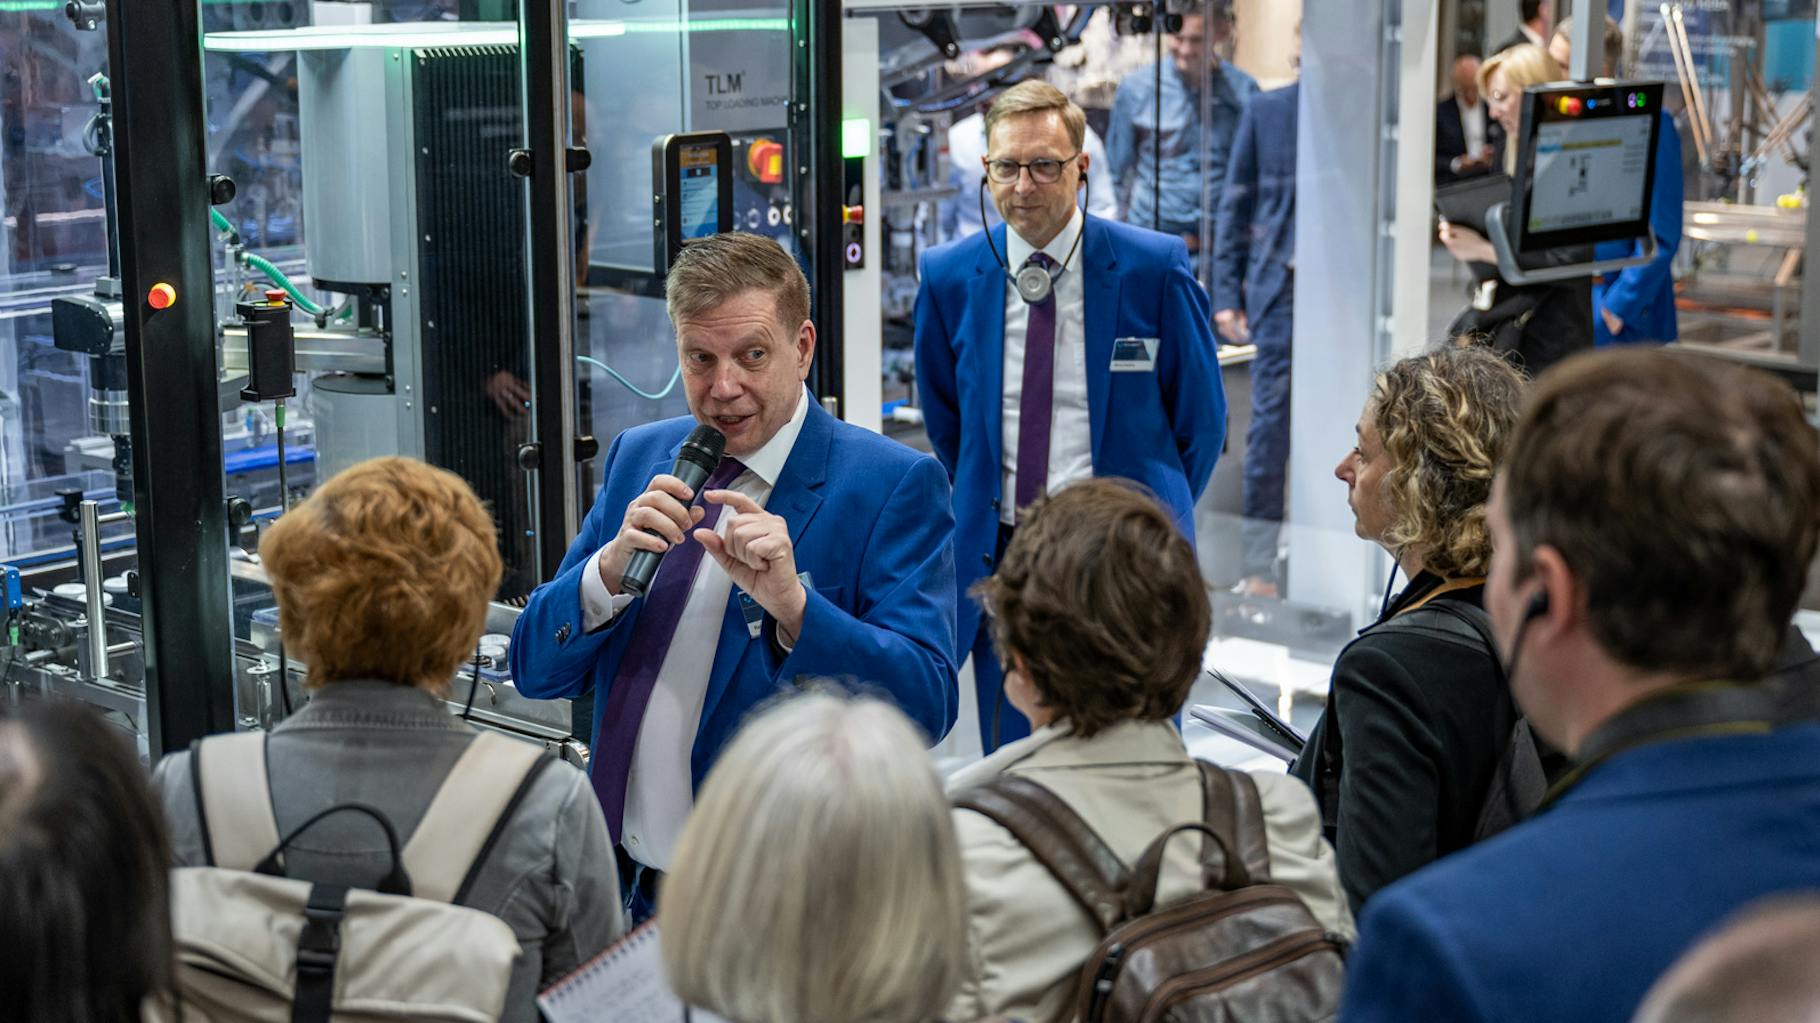 A crowd listens to a speaker from pr agency schubert talking into a microphone and standing in front of various machines.